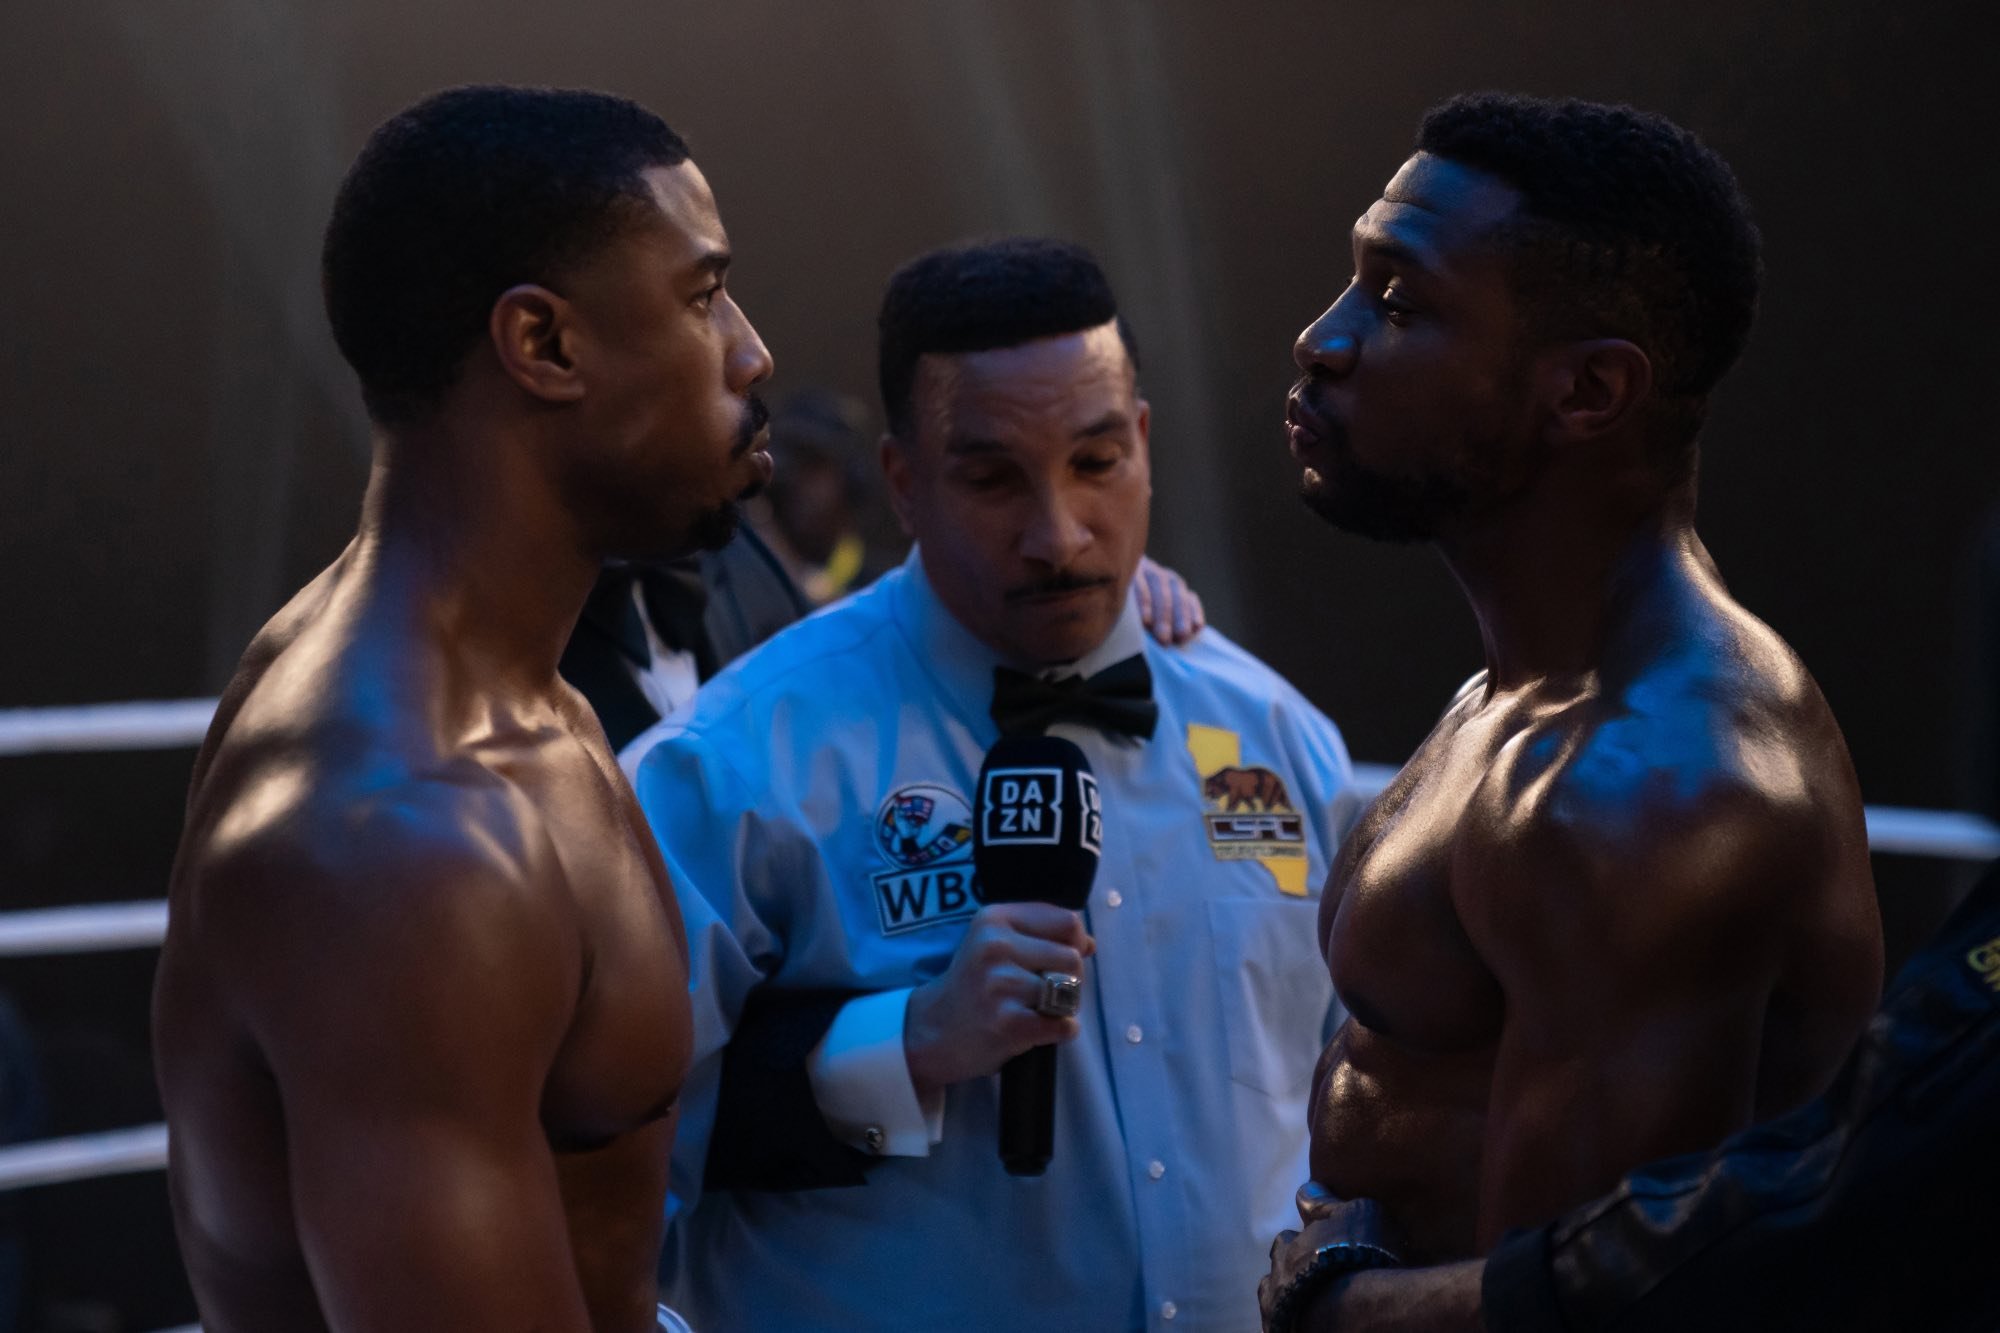 'Creed III' Michael B. Jordan as Adonis Creed and Jonathan Majors as Damian Anderson shirtless in the boxing ring looking at one another with the referee standing in between them